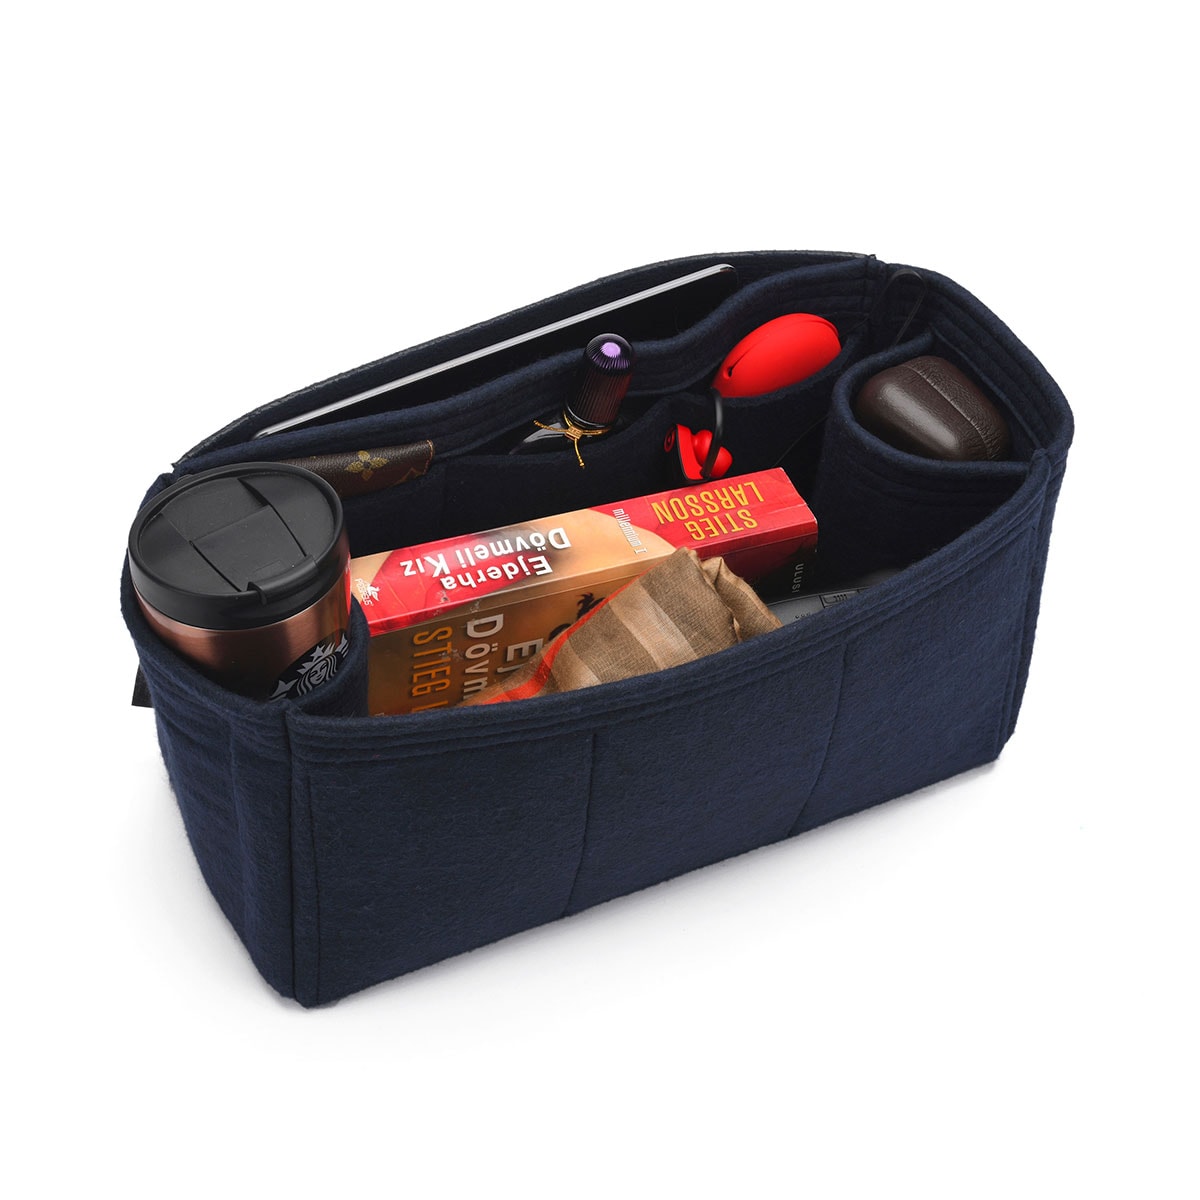 Louis Vuitton Speedy Organizer Insert, Bag Organizer with Double Bottle  Holders and Exterior Pockets